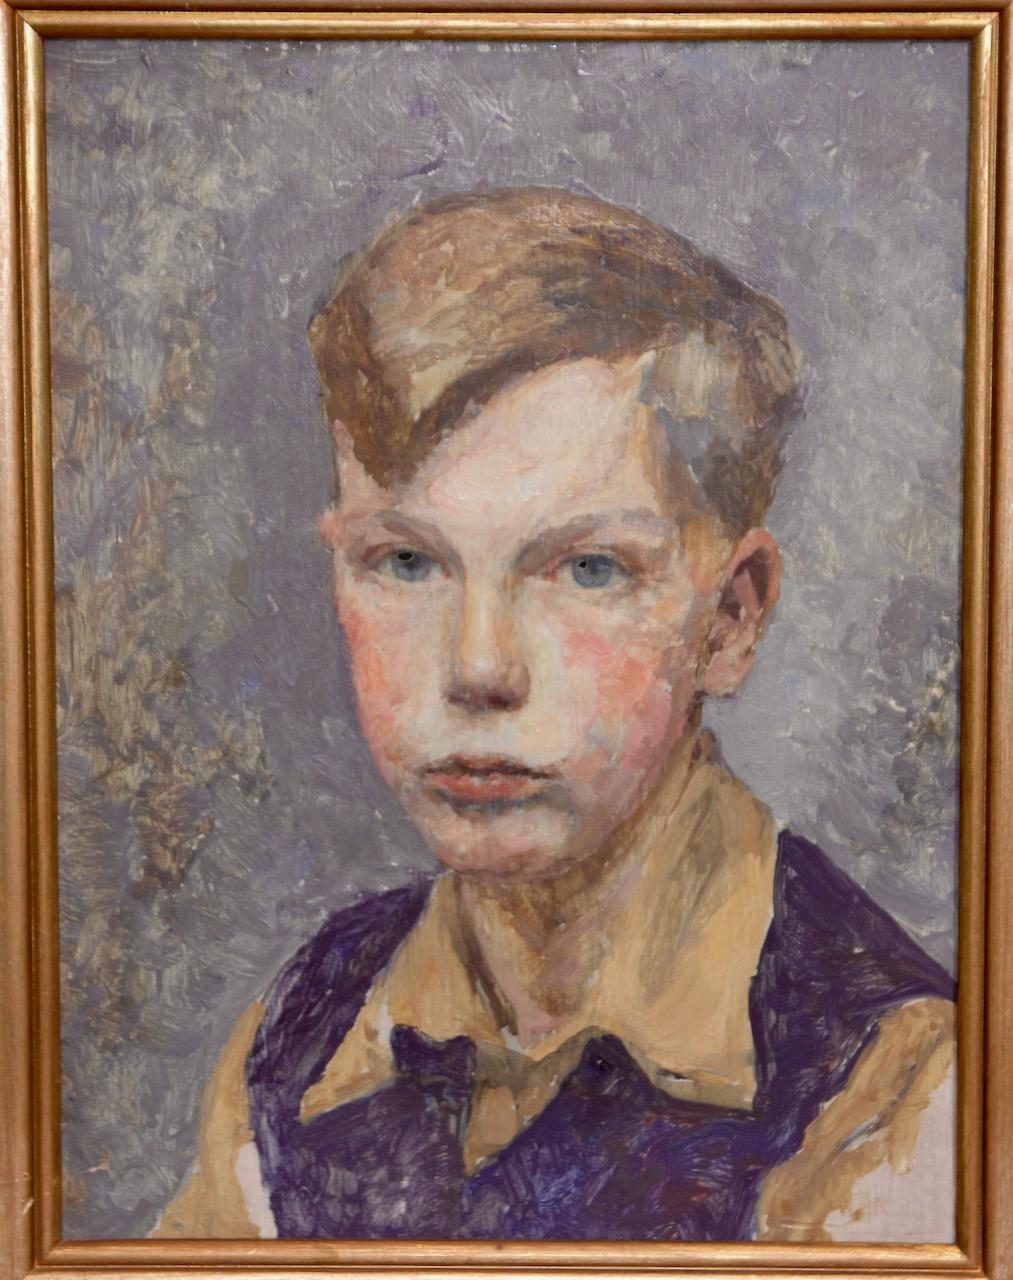 Portrait of a young boy, impressionist painting. - Impressionist Painting by Unknown